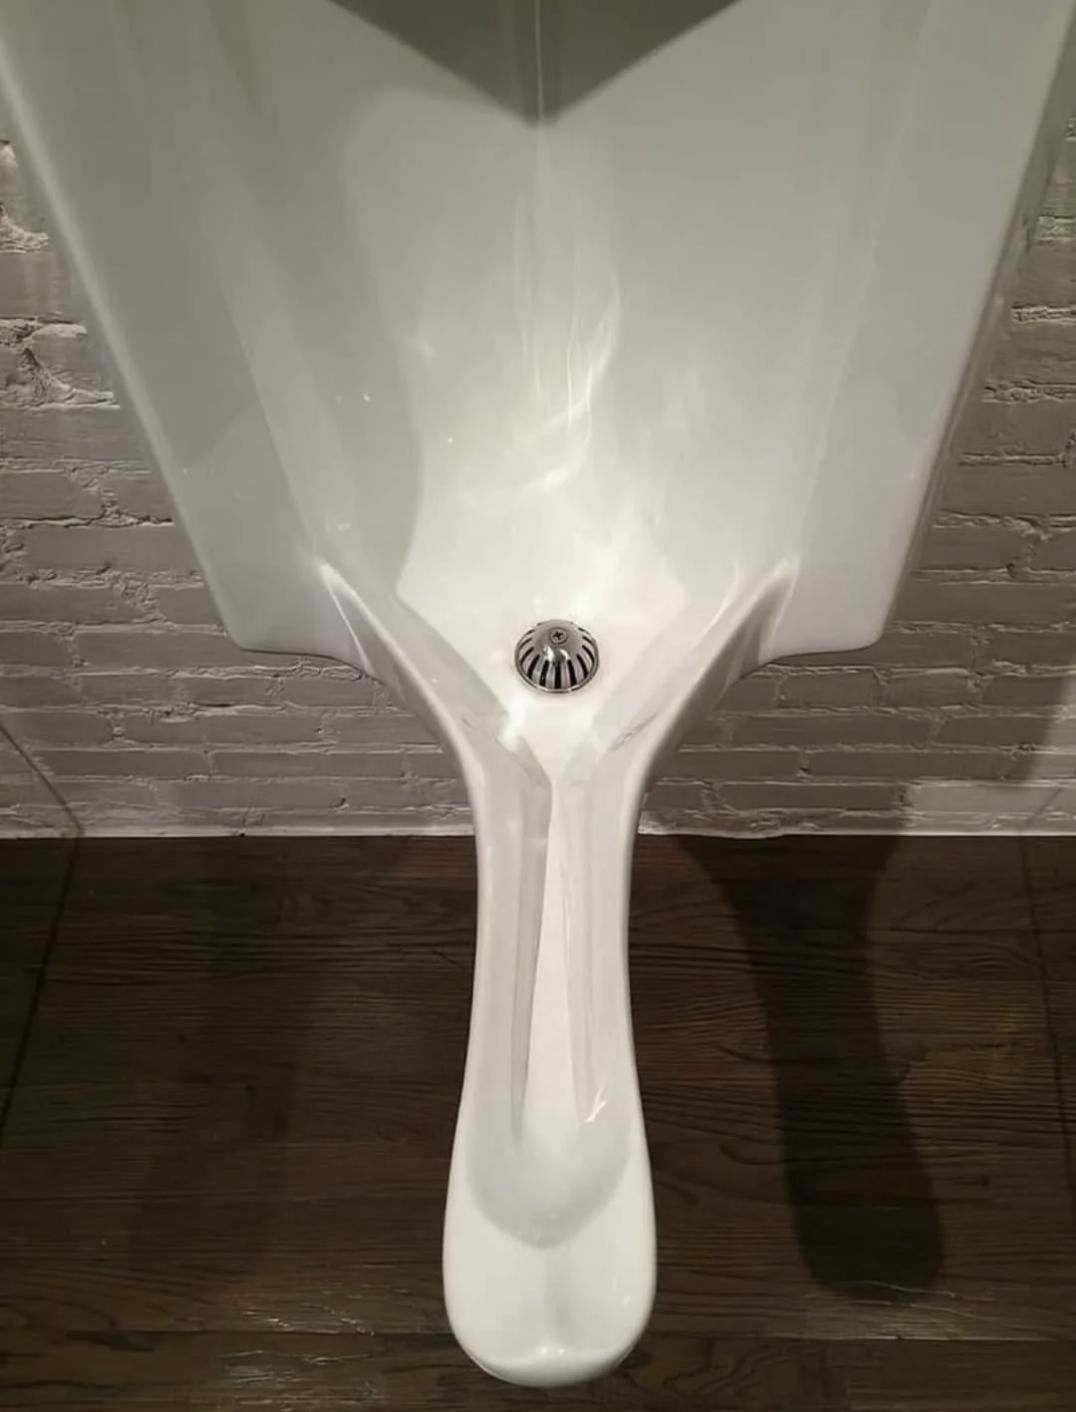 Urinal with a tubular protuberance extending from the center